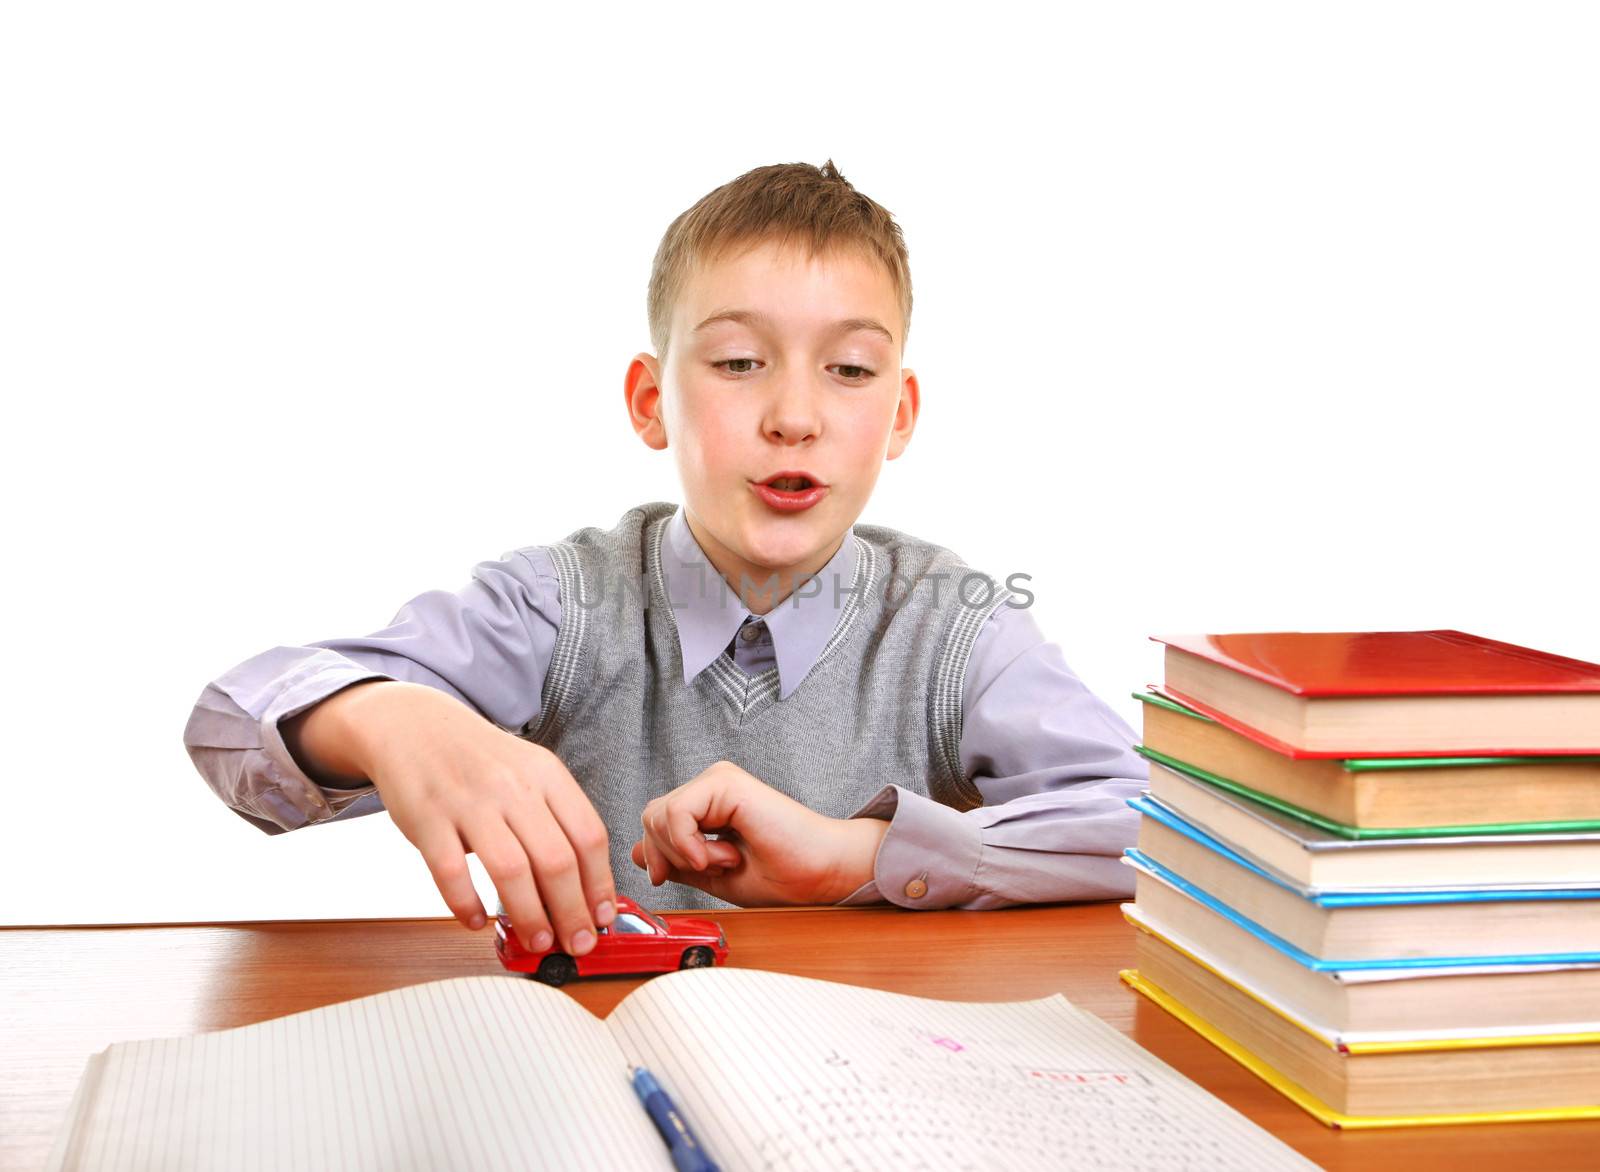 Schoolboy plays with a Toy on the School Desk on the white background